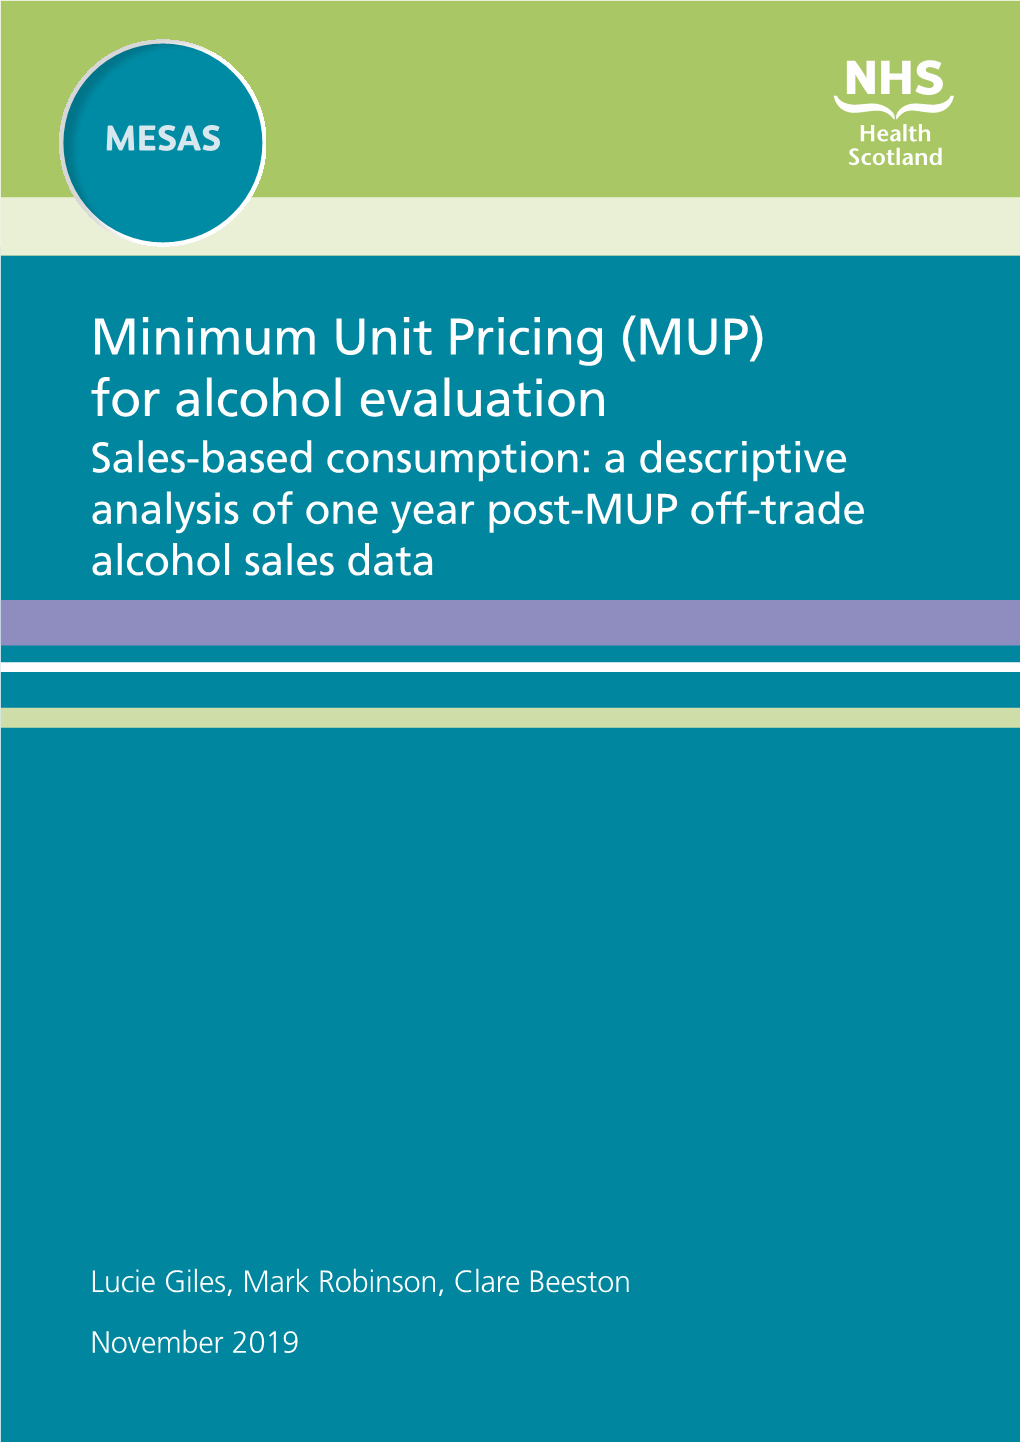 Descriptive Analysis of One Year Post MUP Off-Trade Alcohol Sales Data